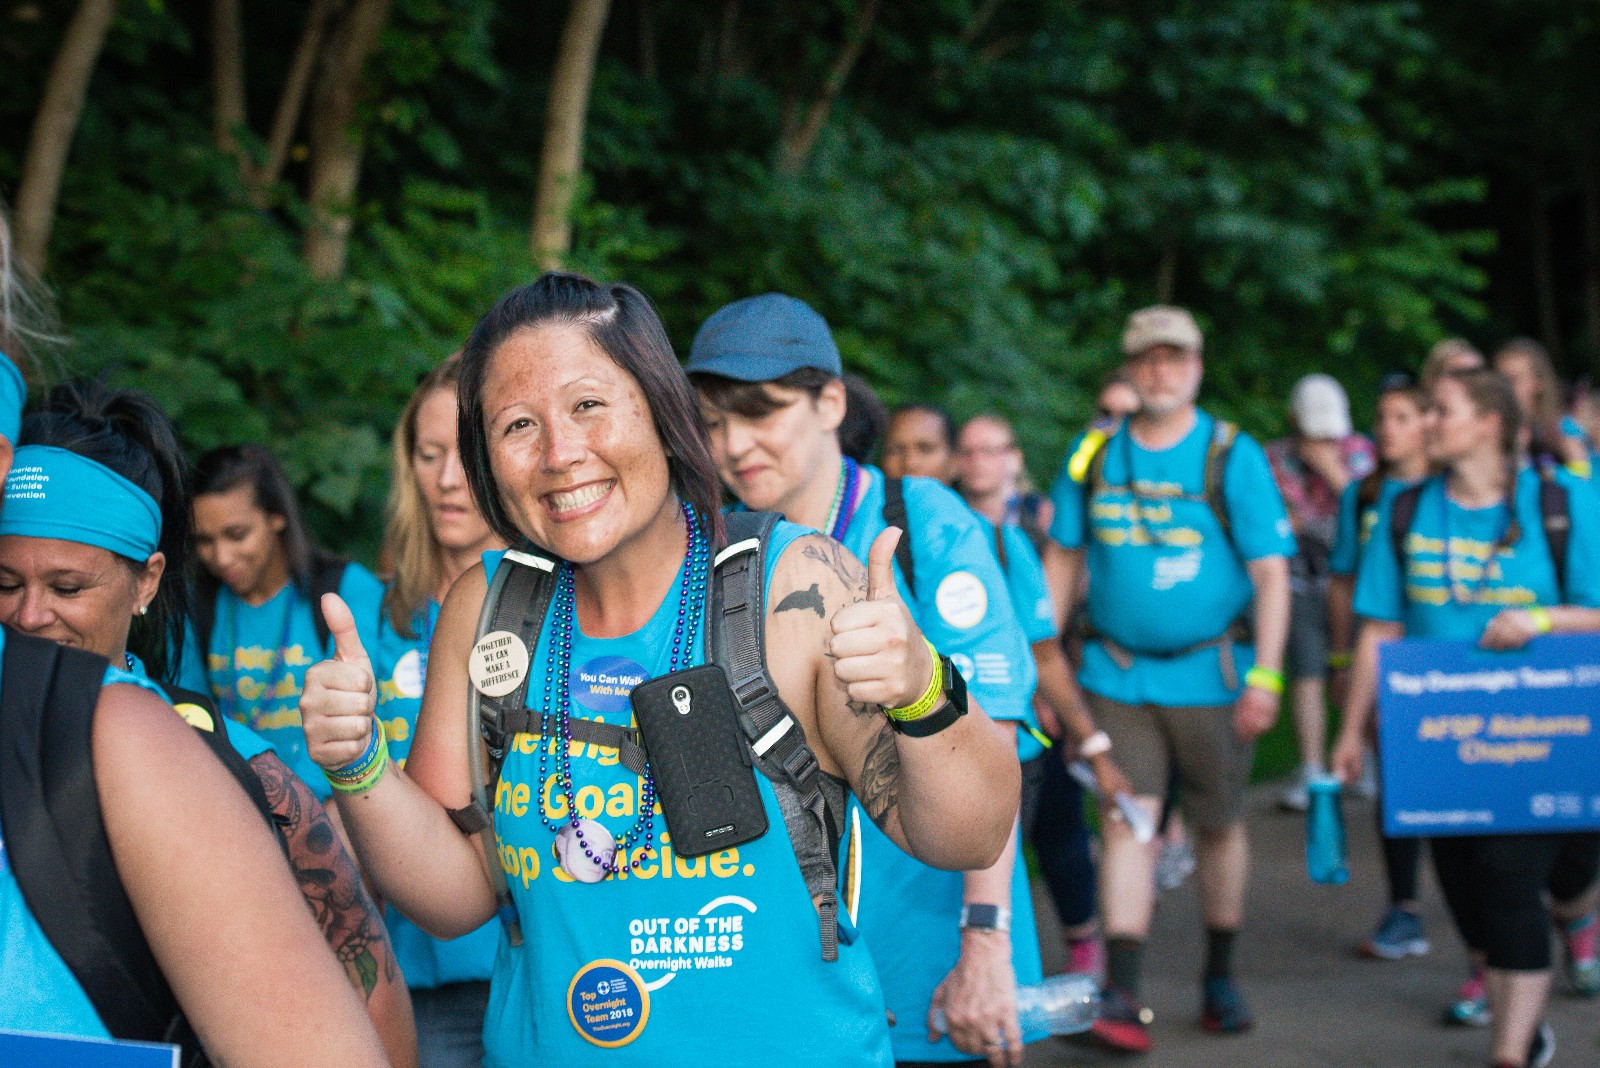 Be a Worthy Warrior and Join The Overnight Walk in New York on June 4th